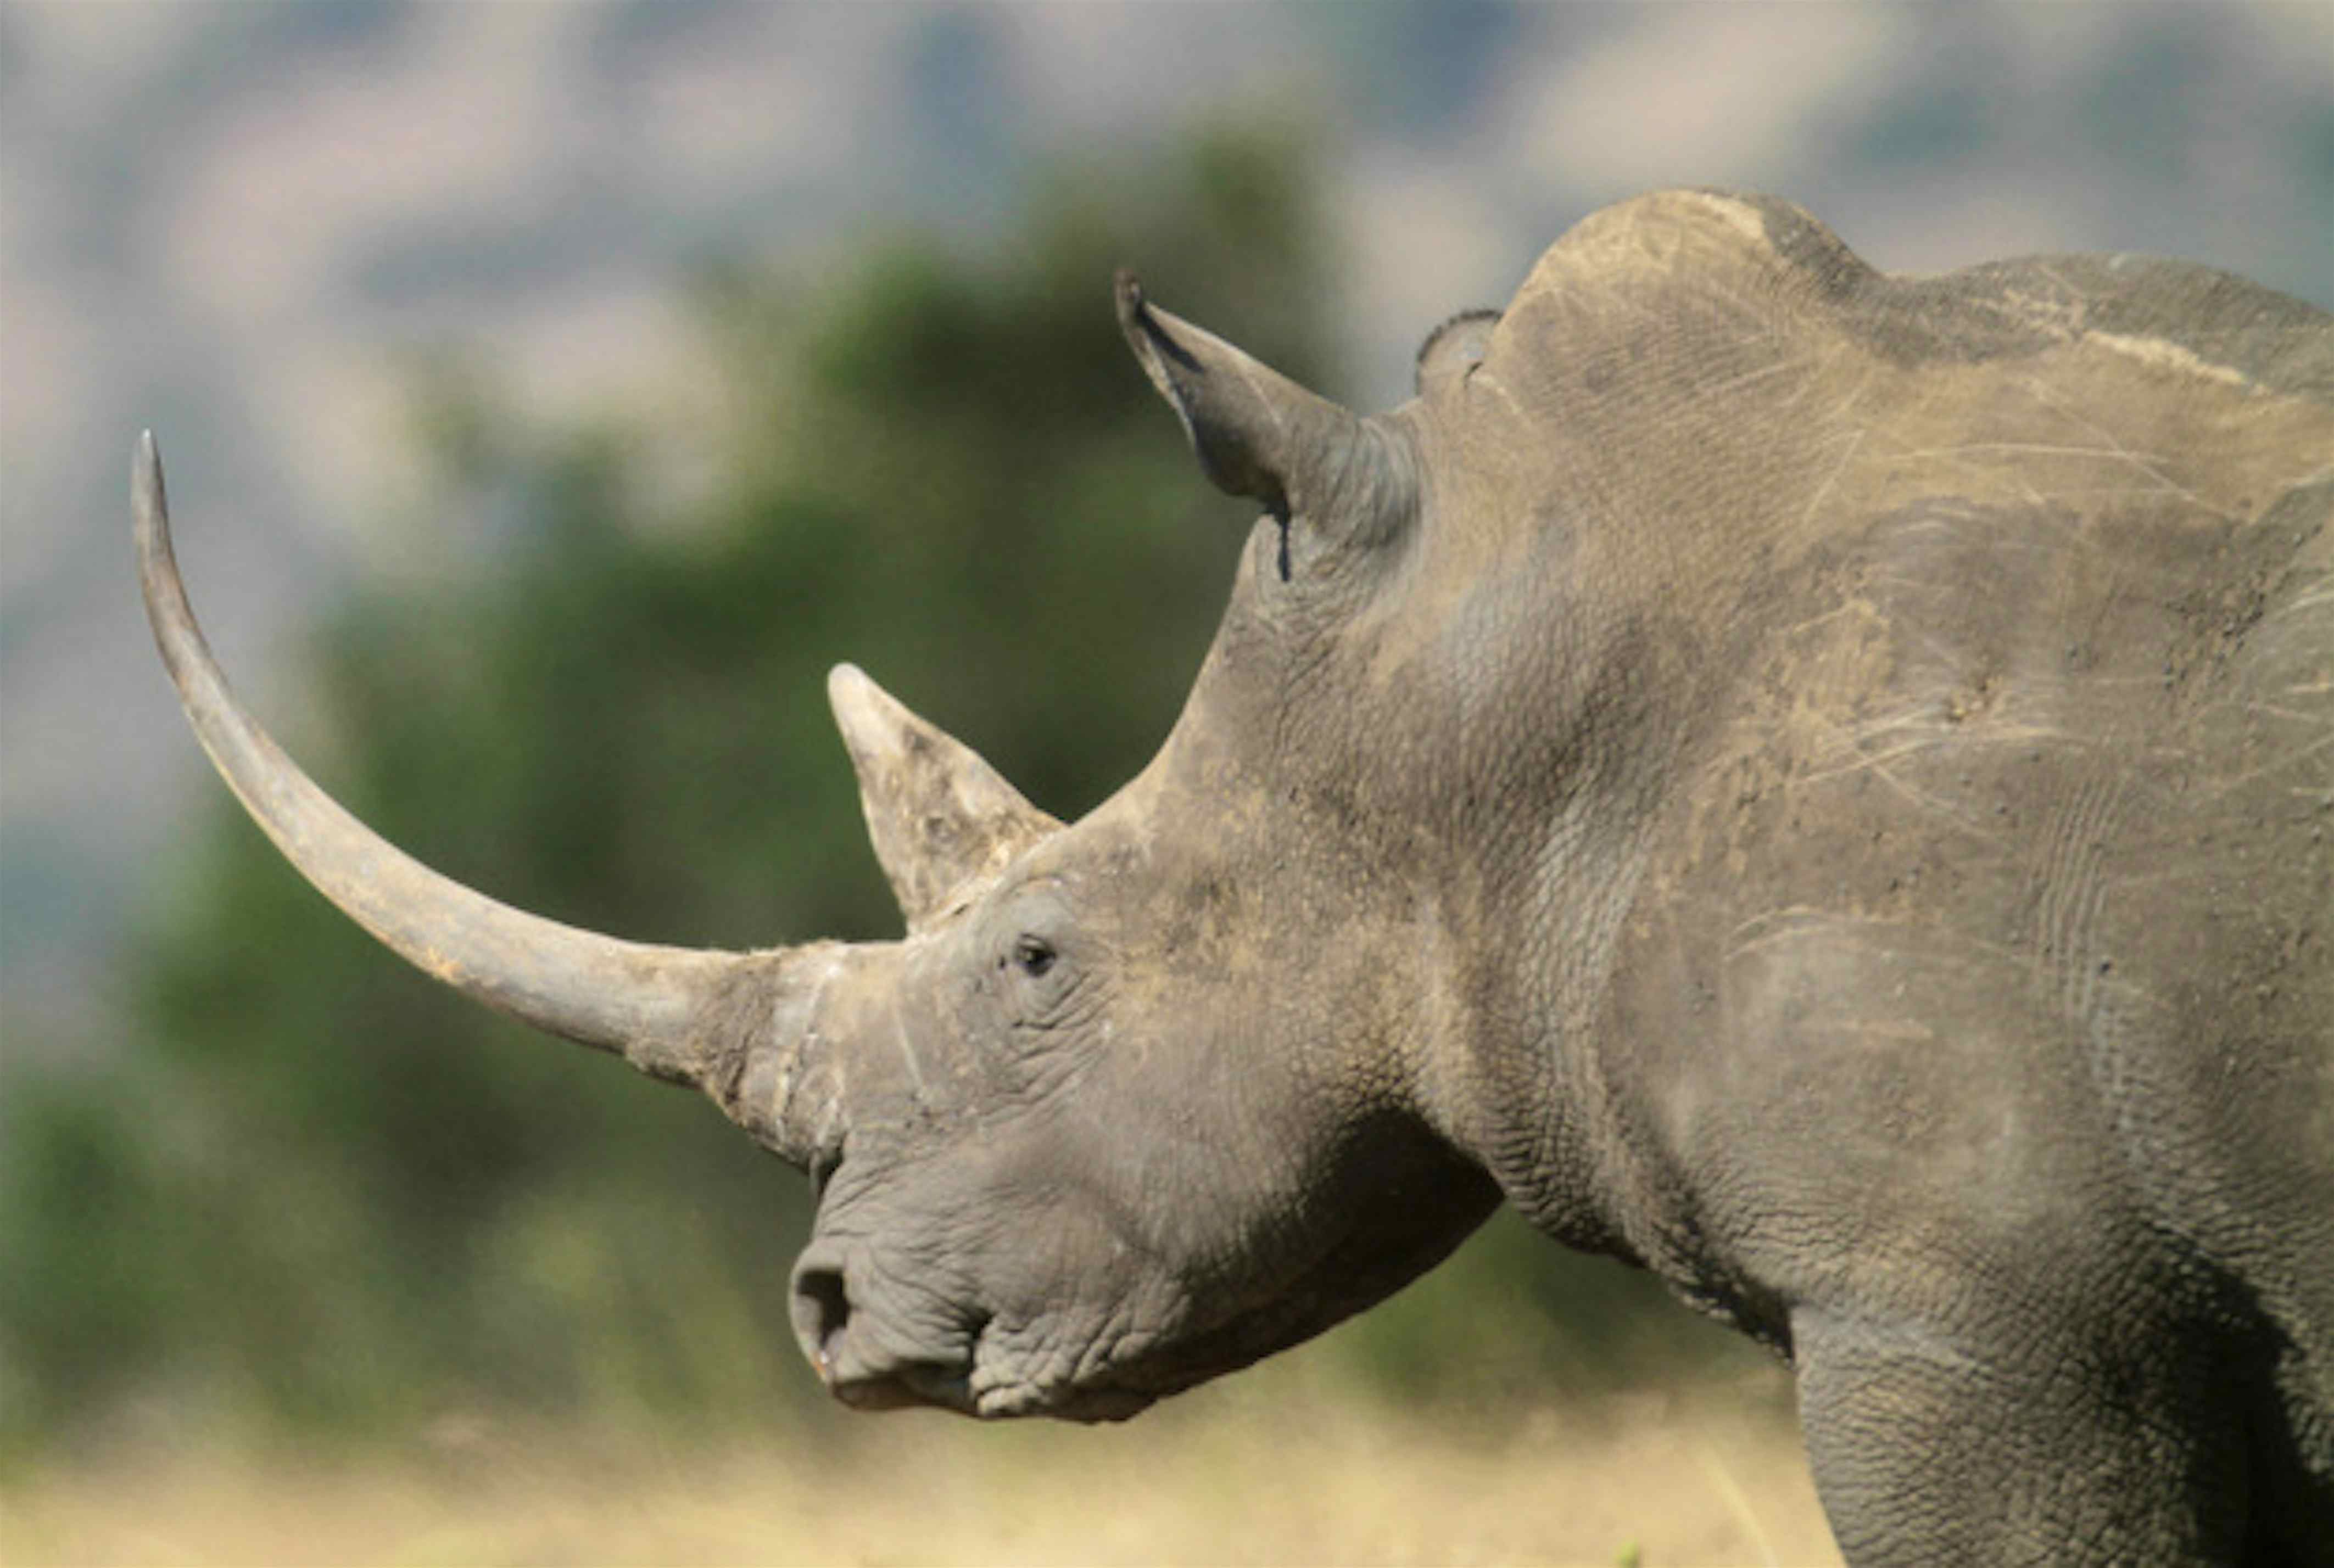 On the brink of extinction now just 6 northern white rhino remain